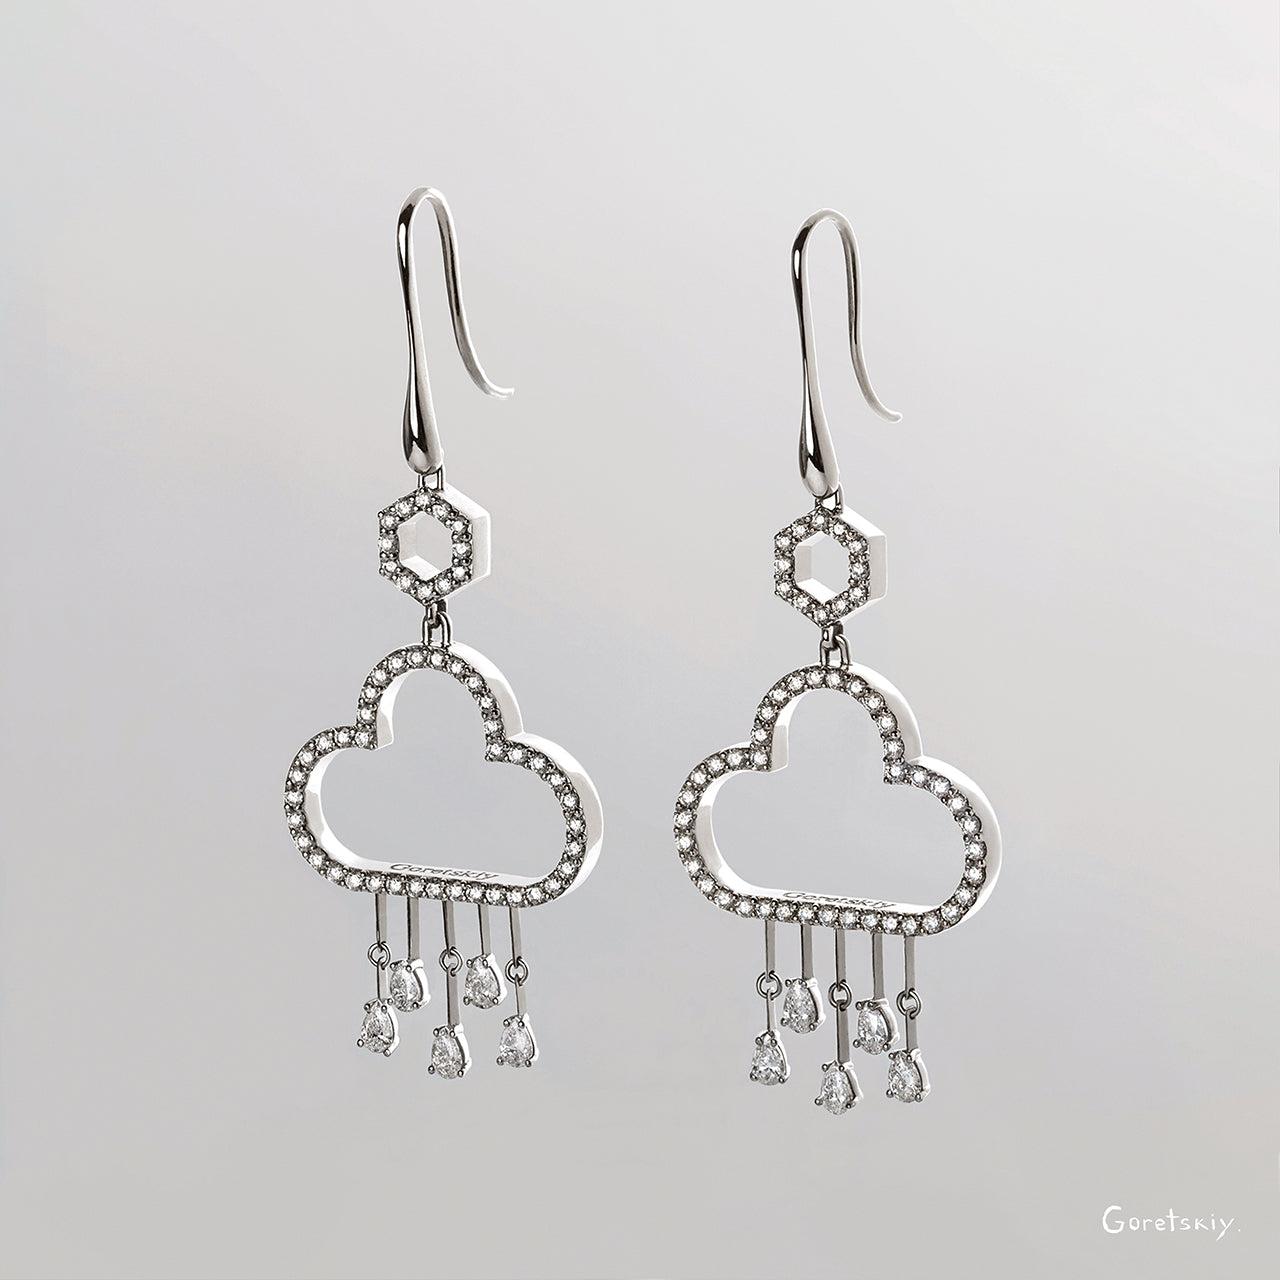 Extraordinary earrings, silver jewelry piece with natural diamonds